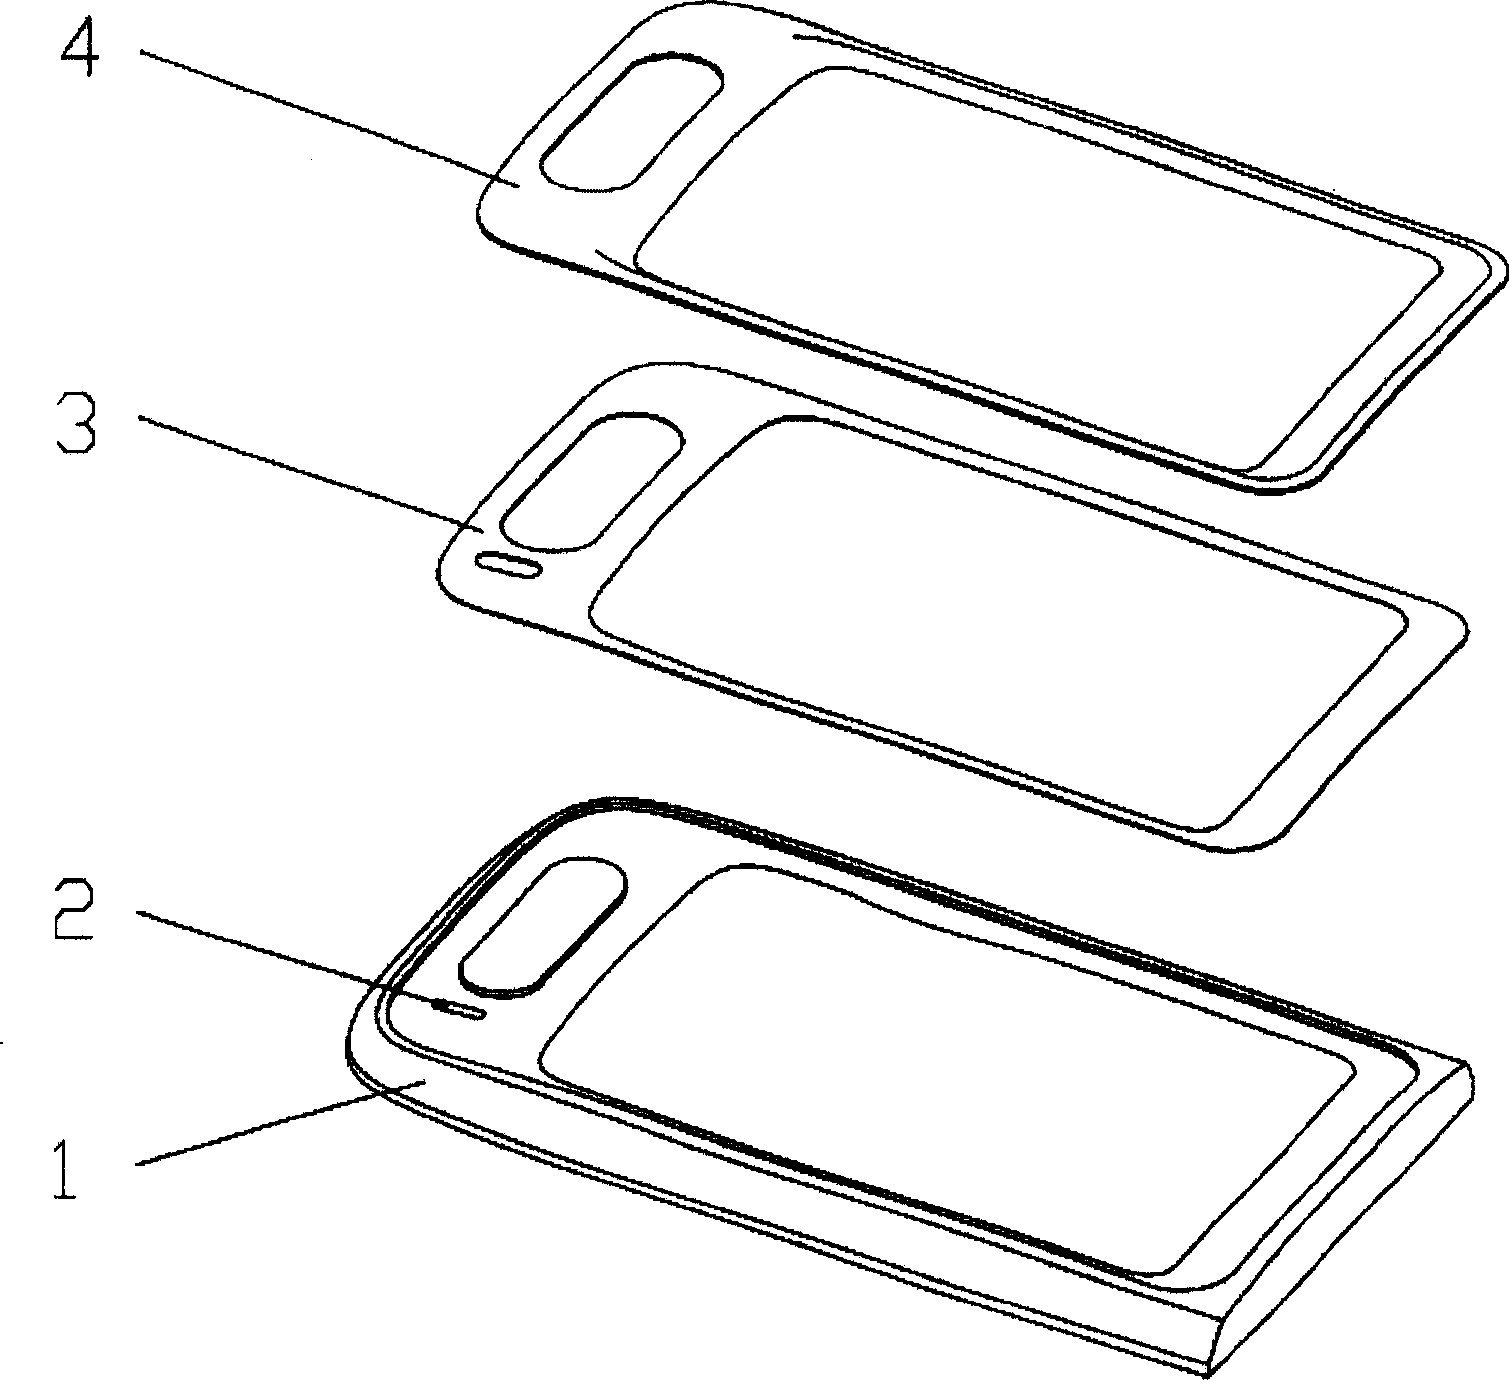 A grounding method of the outside metal parts of the electronic products